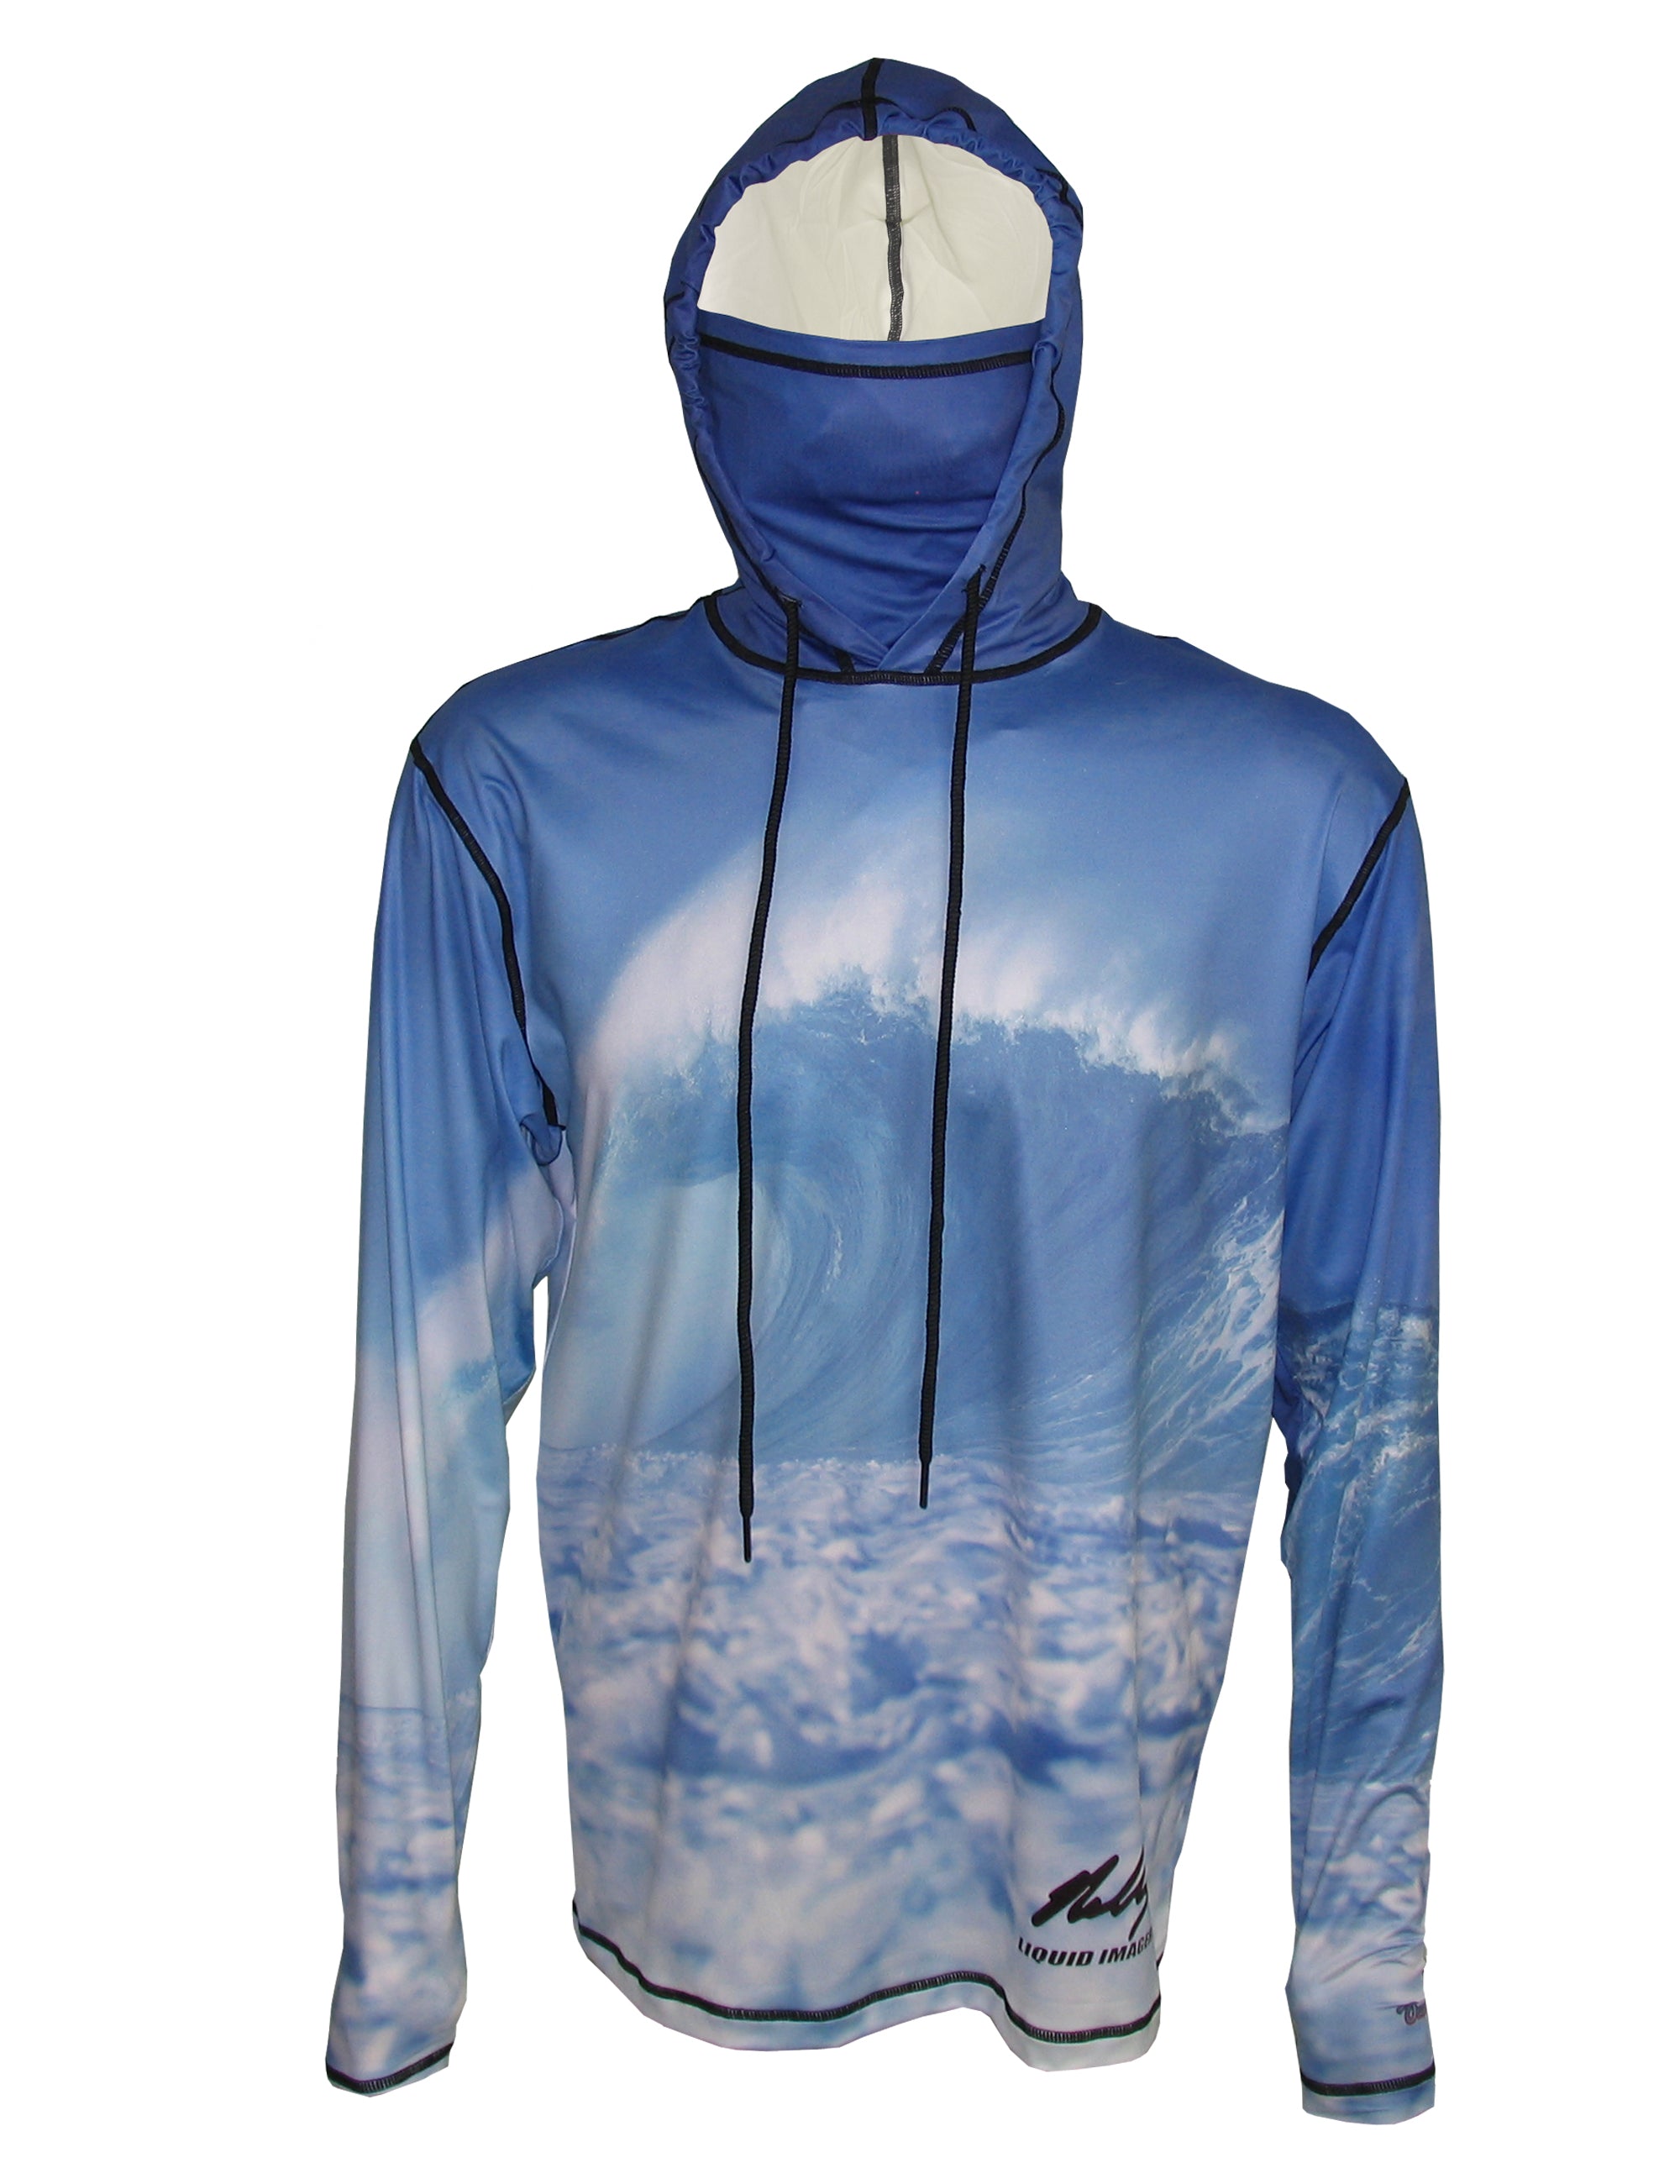 Blue Wave Lightweight Graphic Ocean Hoodie Beach Clothing and